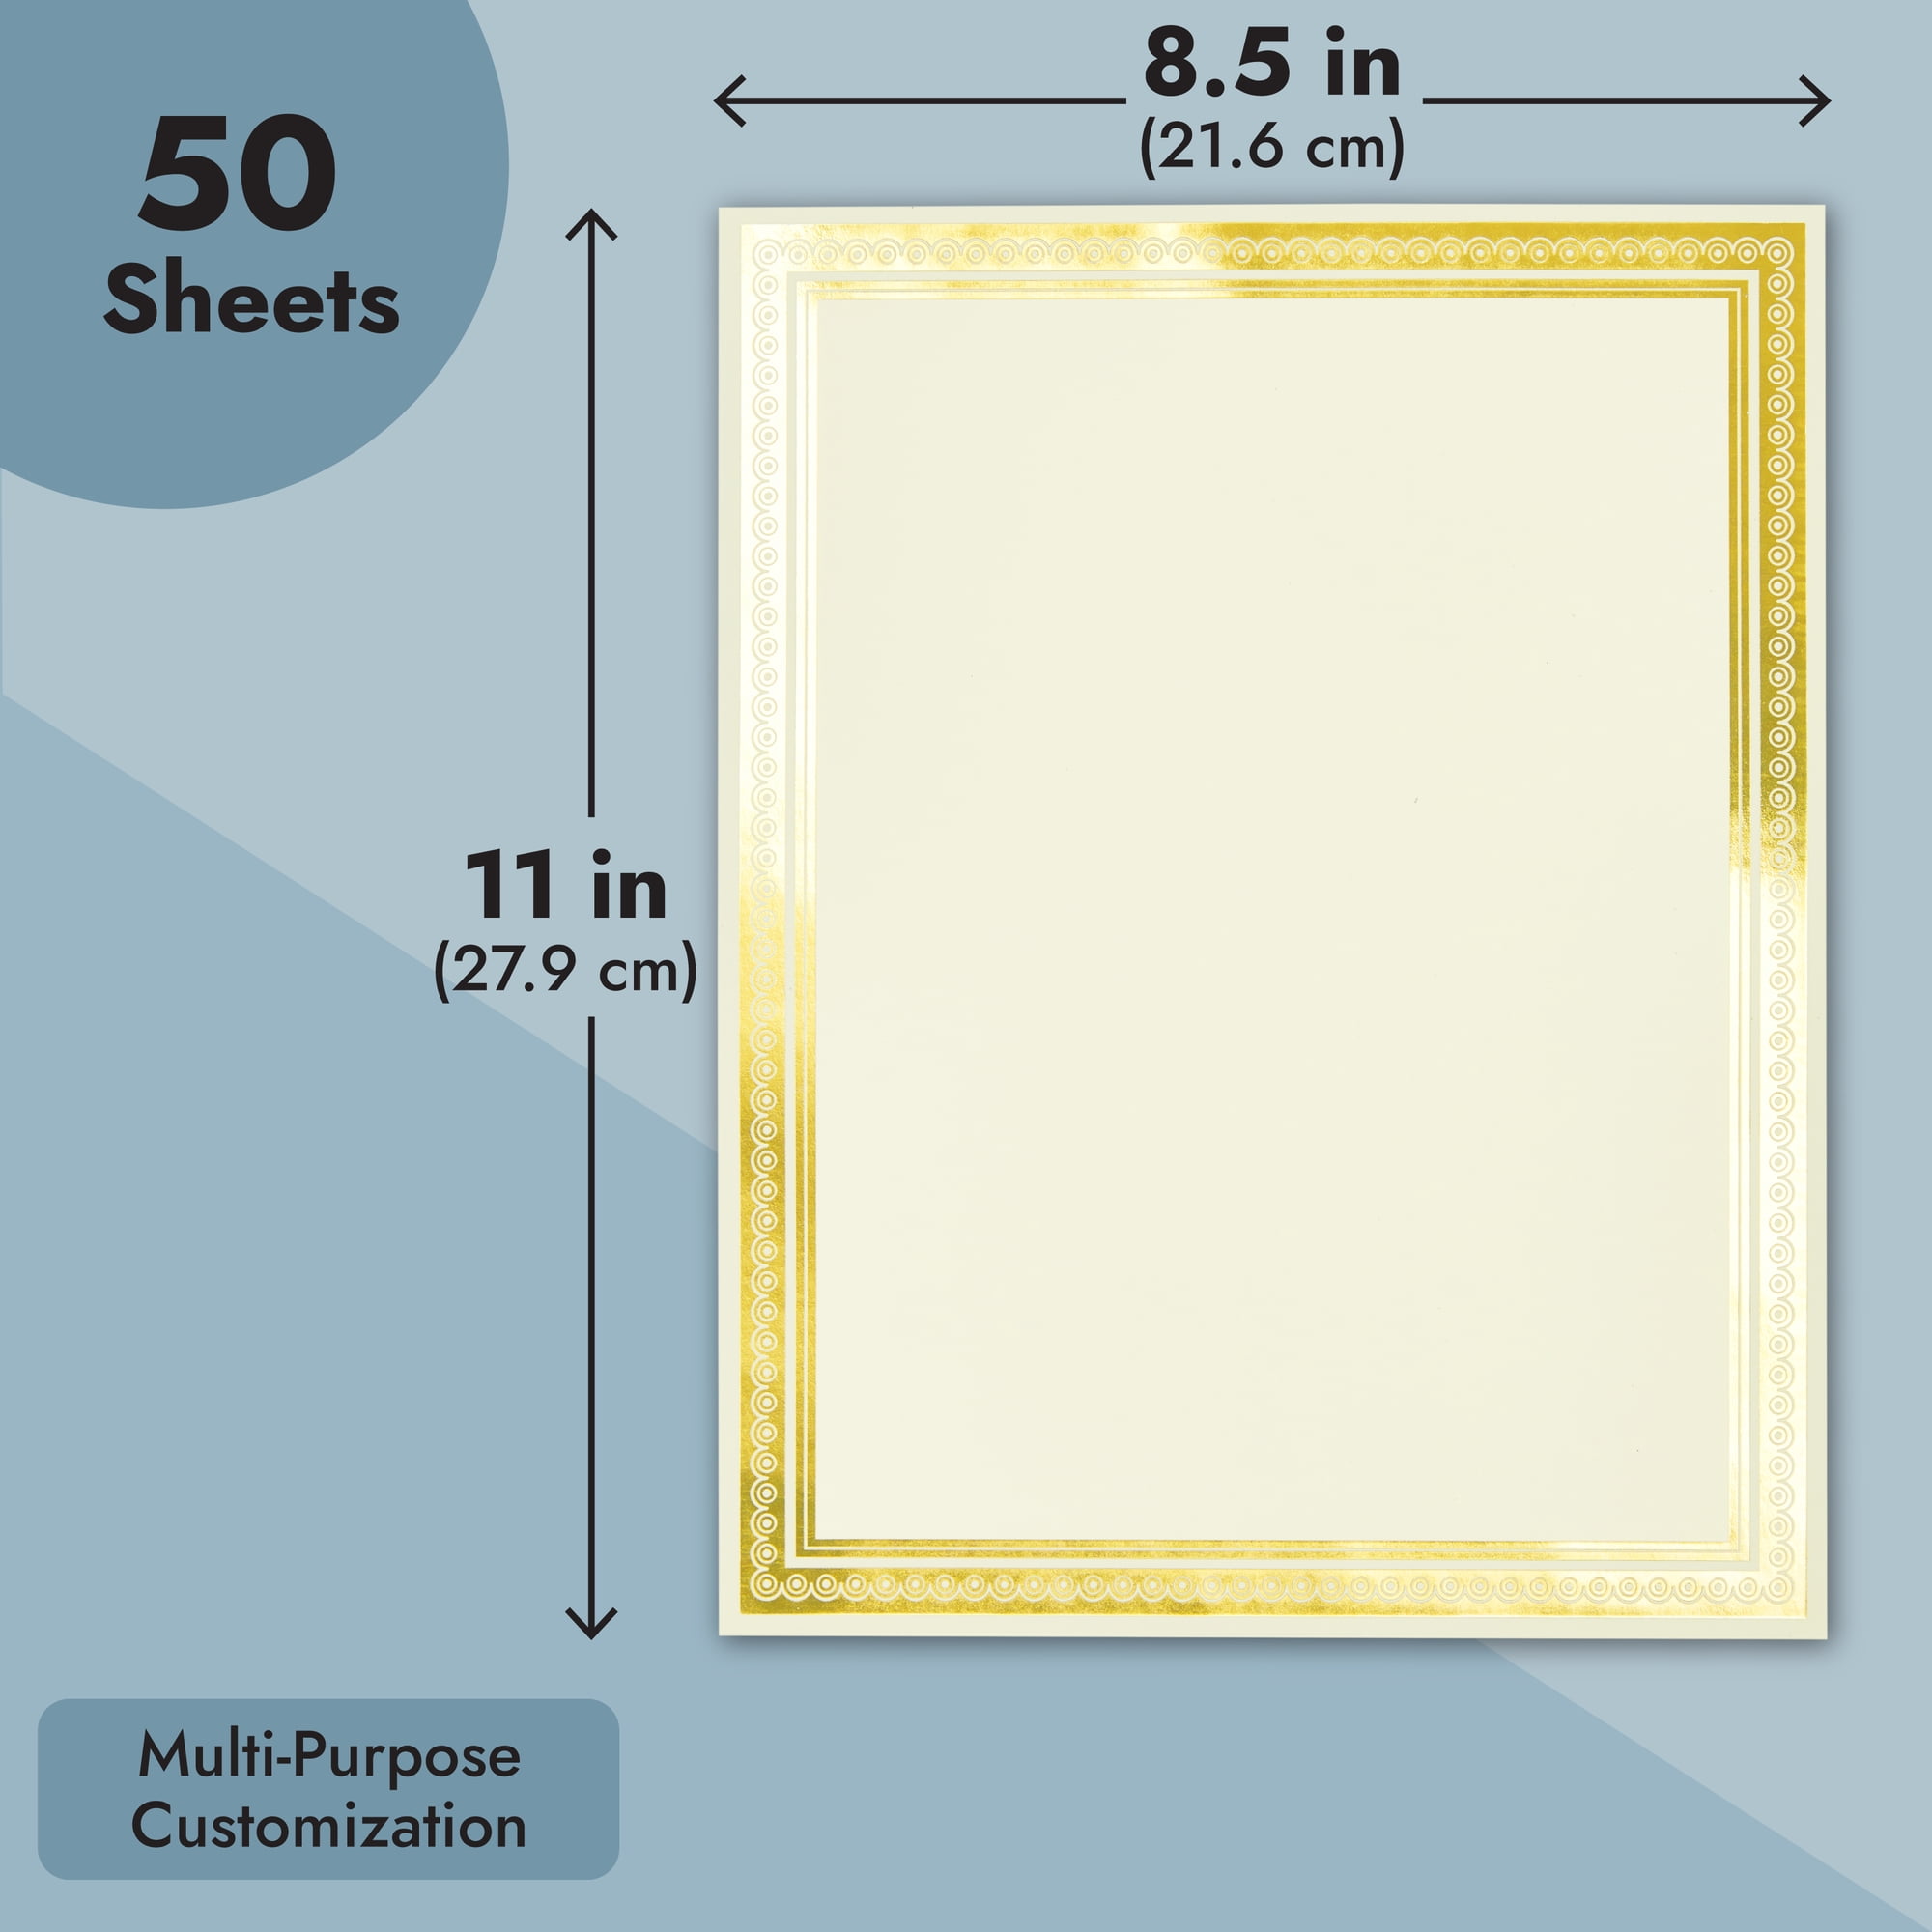  50 Pieces Gold Border Blank Award Certificate Sheets 8.5 x 11  Inch Award Certificate Papers with 50 Pieces Gold Embossed Foil Blank  Certificate Sealing Stickers for Diploma, Laser and Inkjet Printer : Office  Products